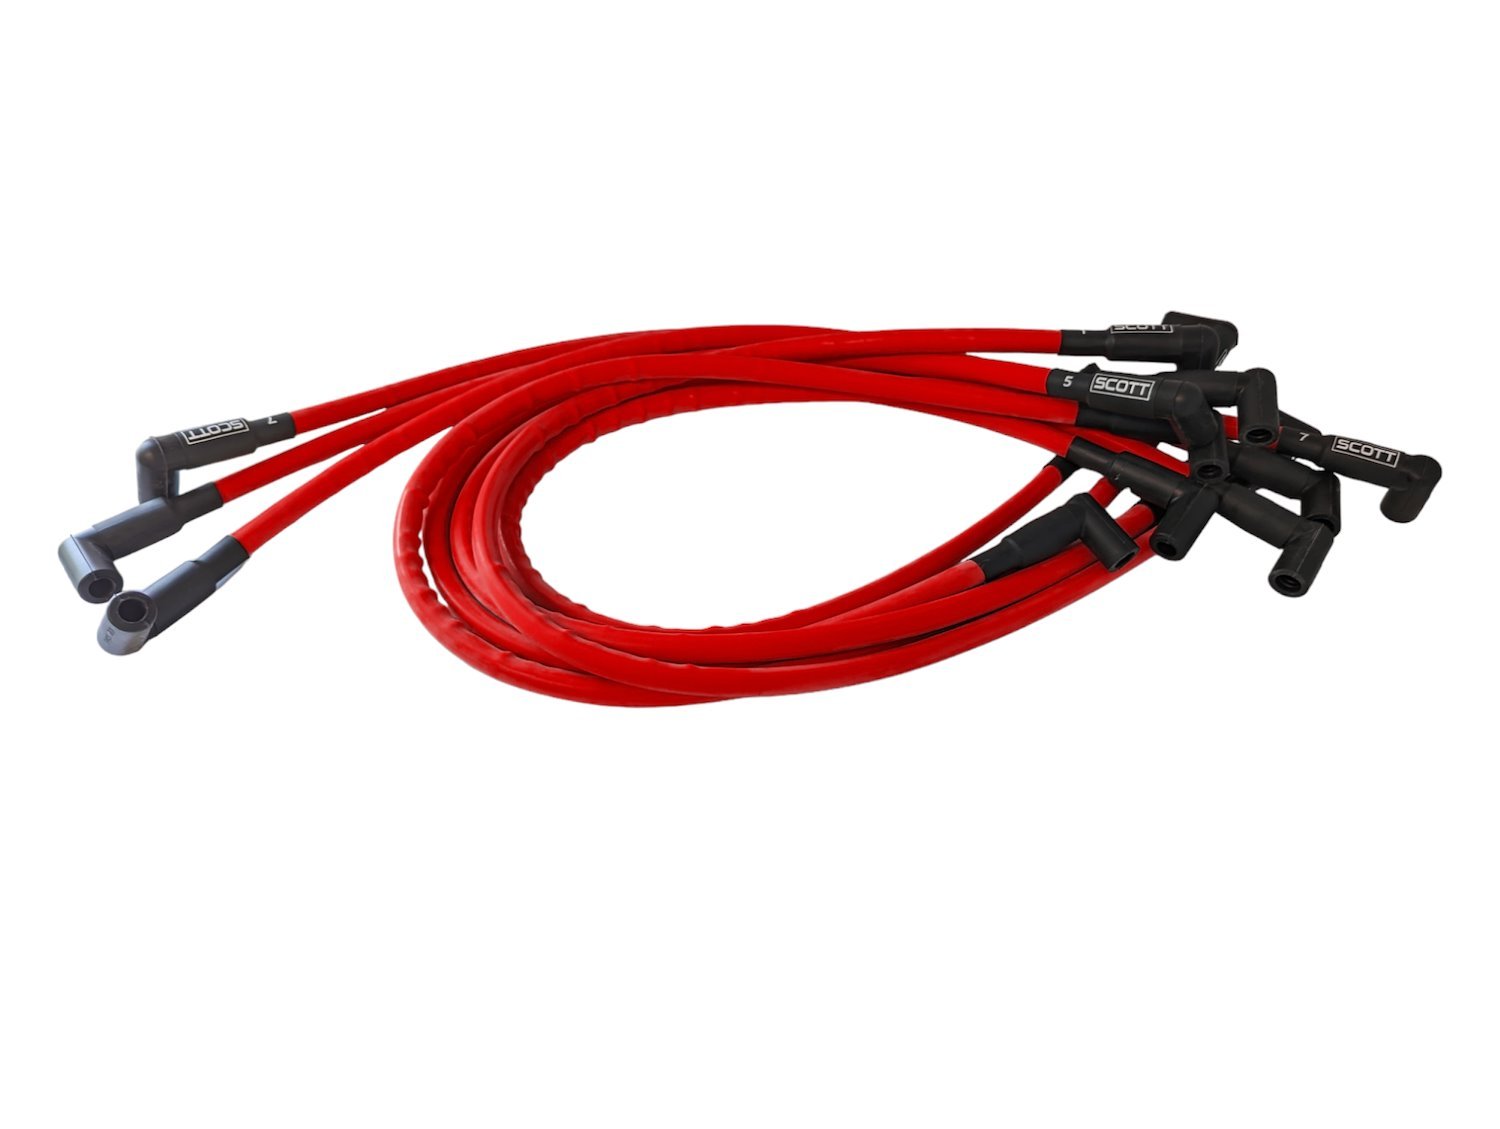 SPW-CH-516-2 High-Performance Silicone-Sleeved Spark Plug Wire Set for Big Block Chevy Dragster, Under Header [Red]